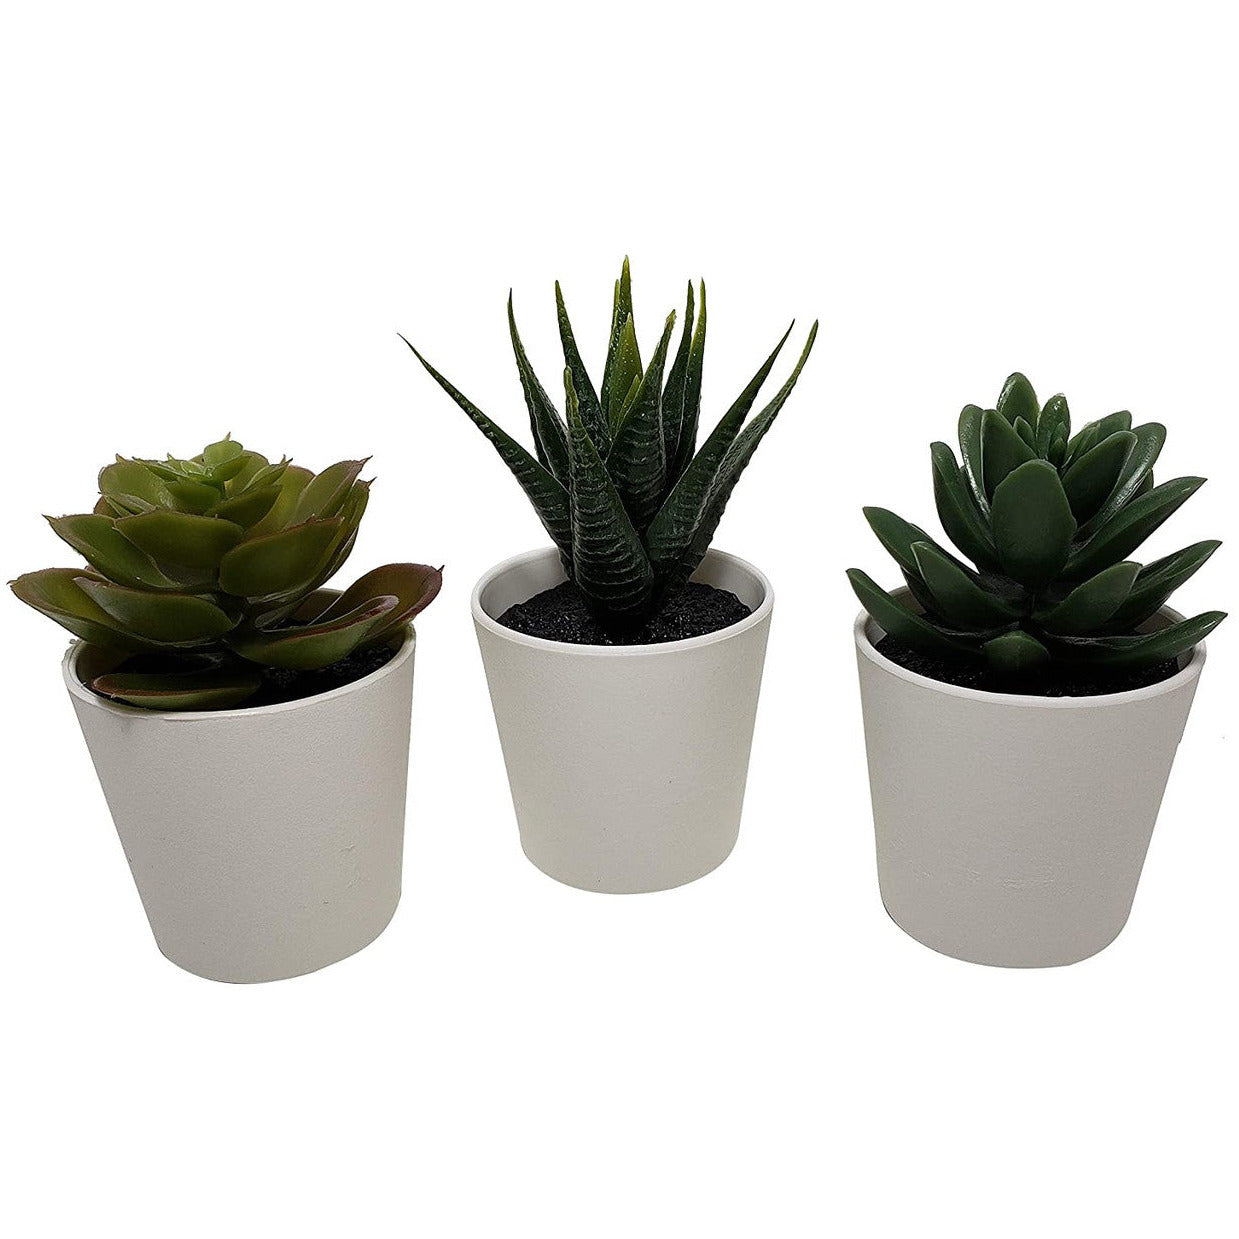 3 Pack of Artificial Succulent Potted Plants in White Plastic 6cm Pot Interior Decoration